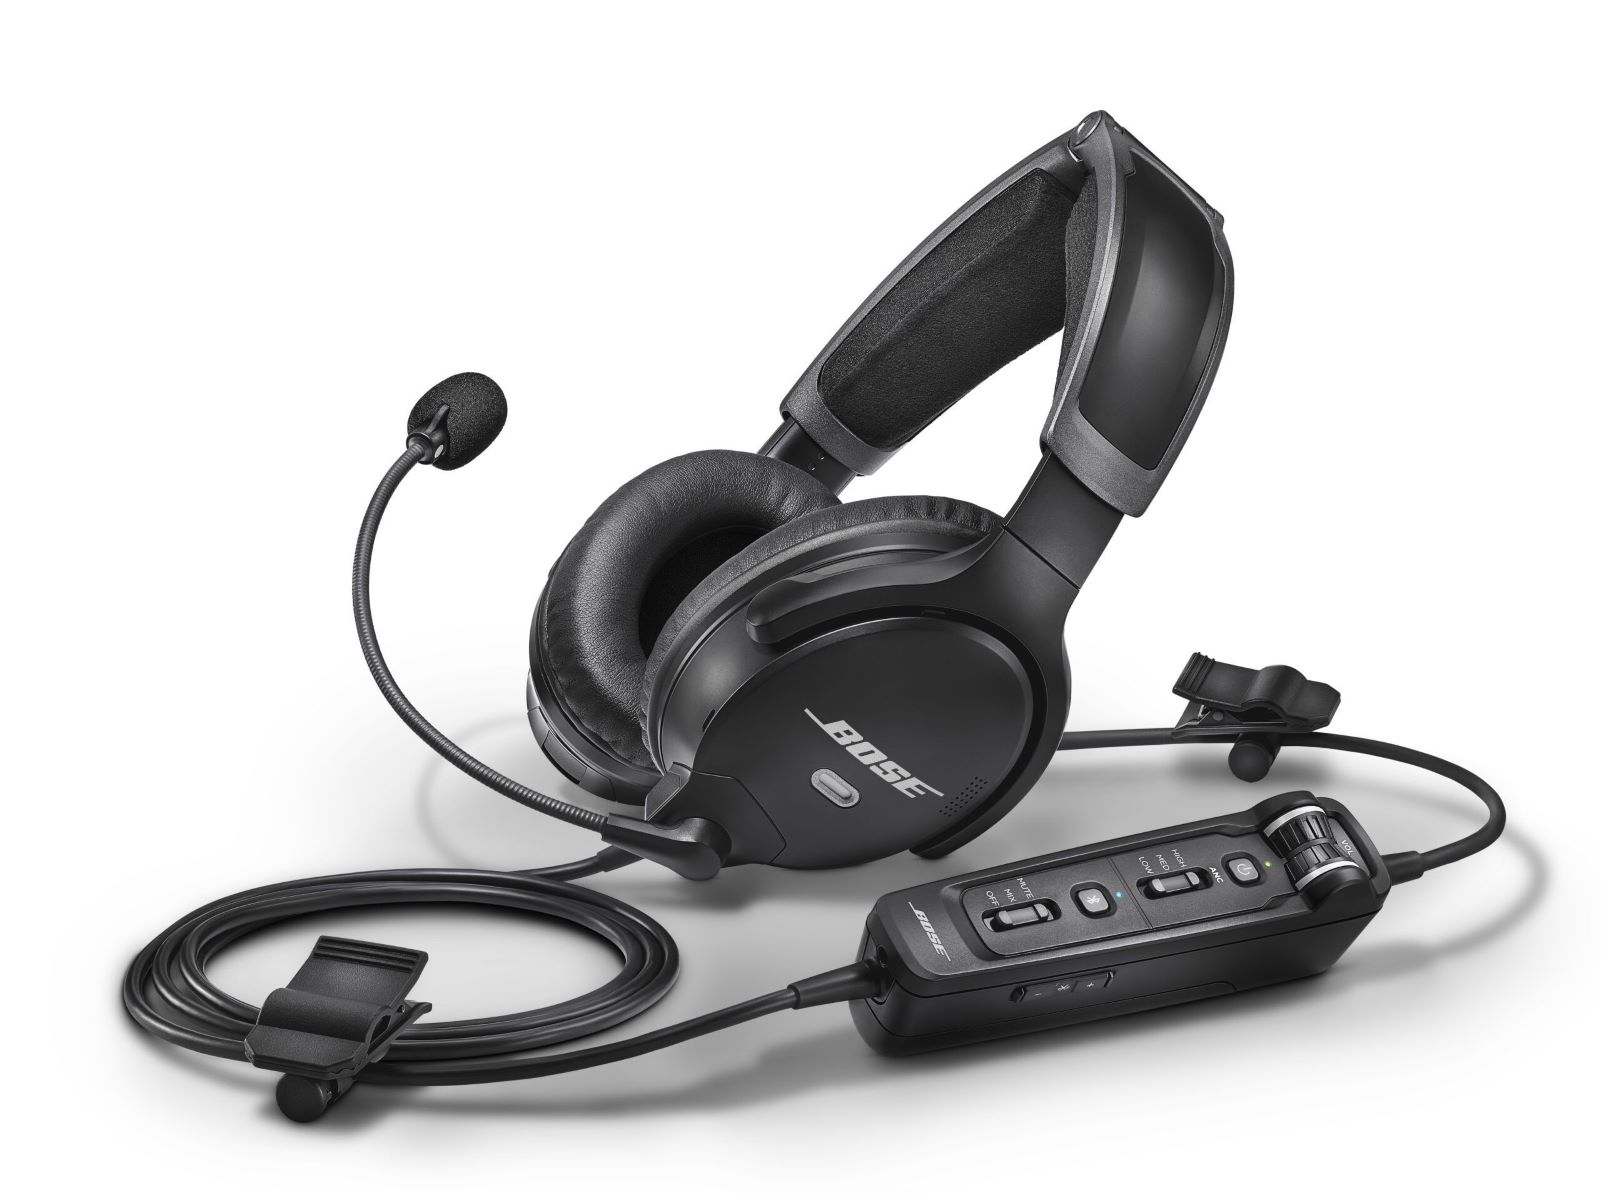 Resetting Your Bose Headset: Step-by-Step Instructions